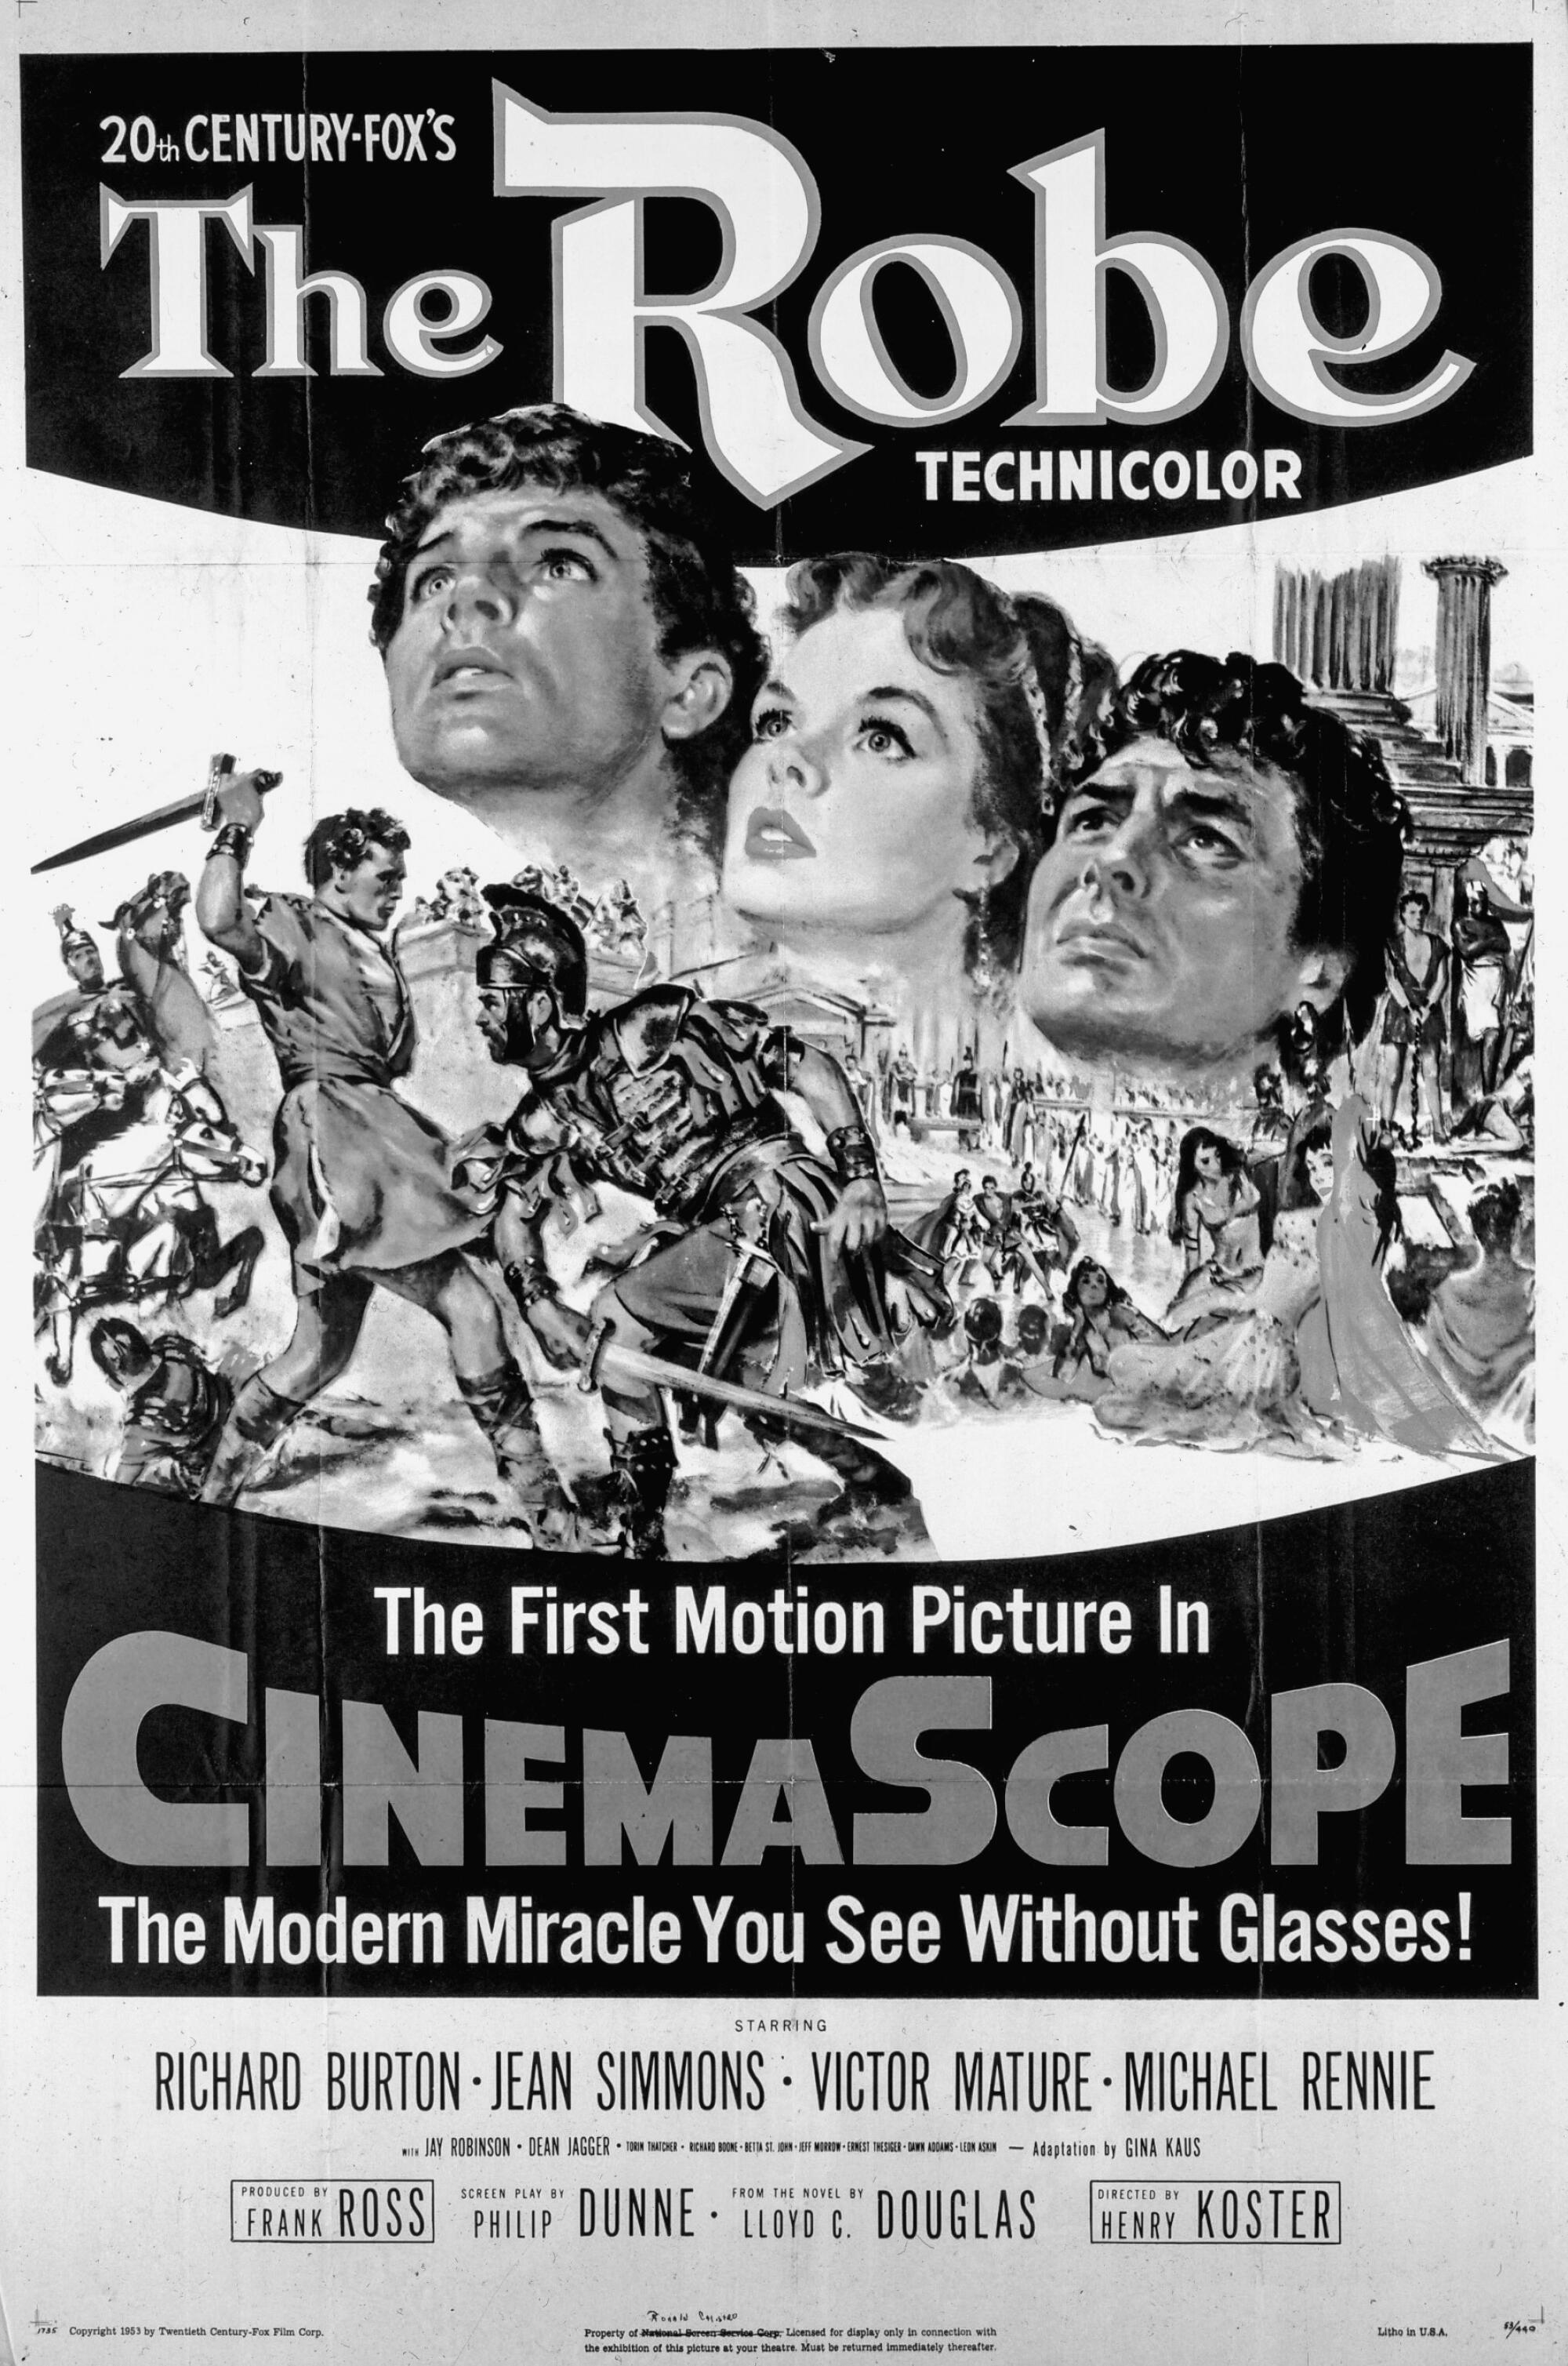 A movie poster featuring various actors for the 1953 black-and-white movie "The Robe."